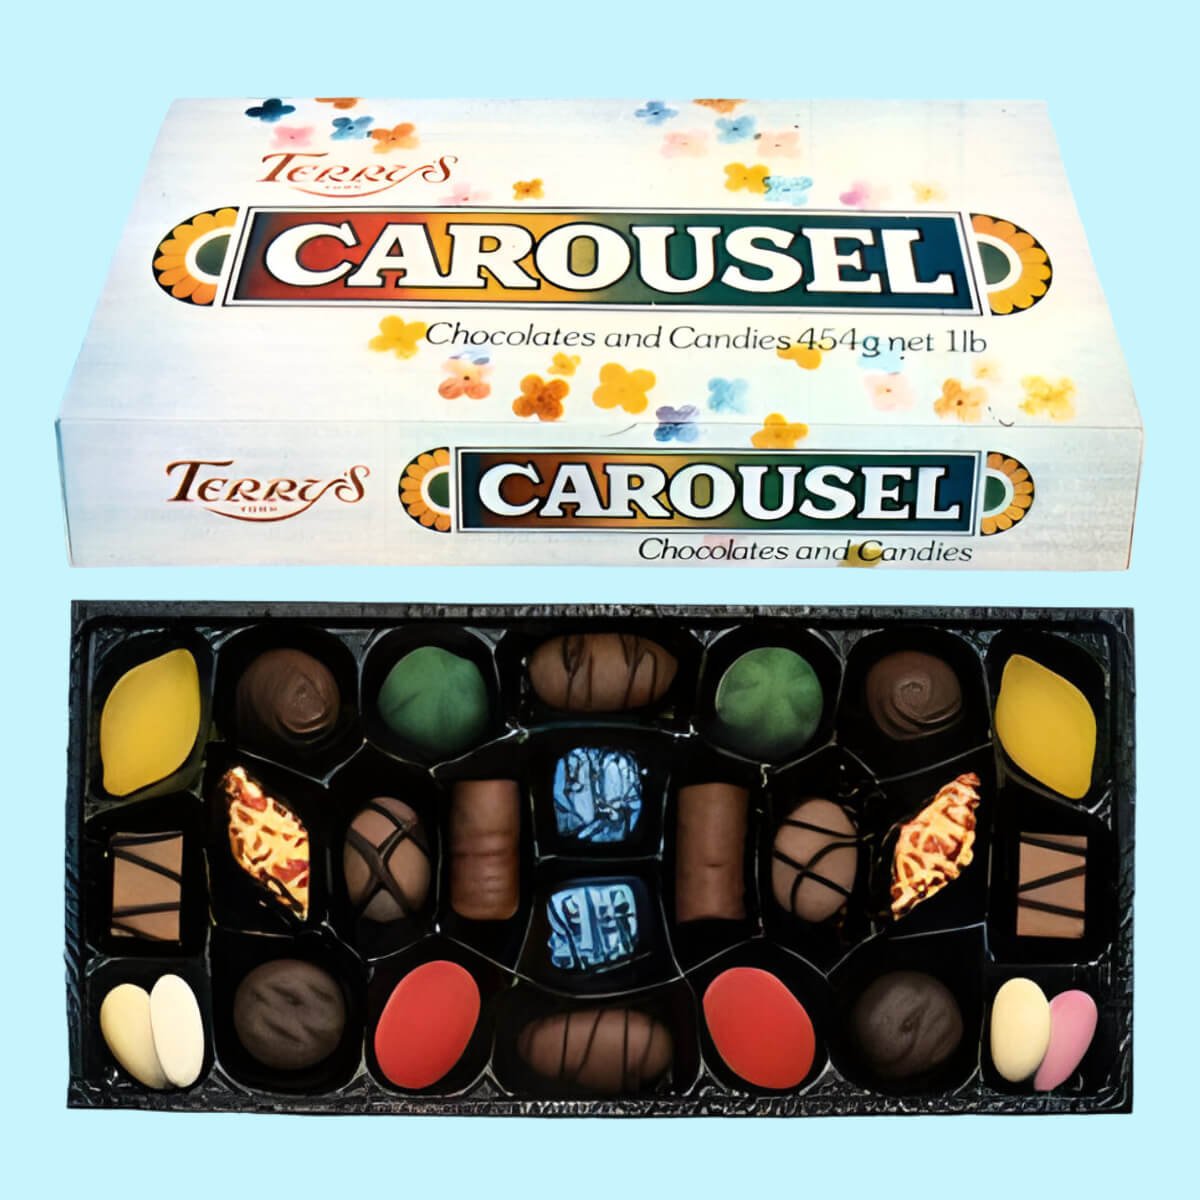 Terry's Carousel - A Whole Sweetshop in a Single Box!